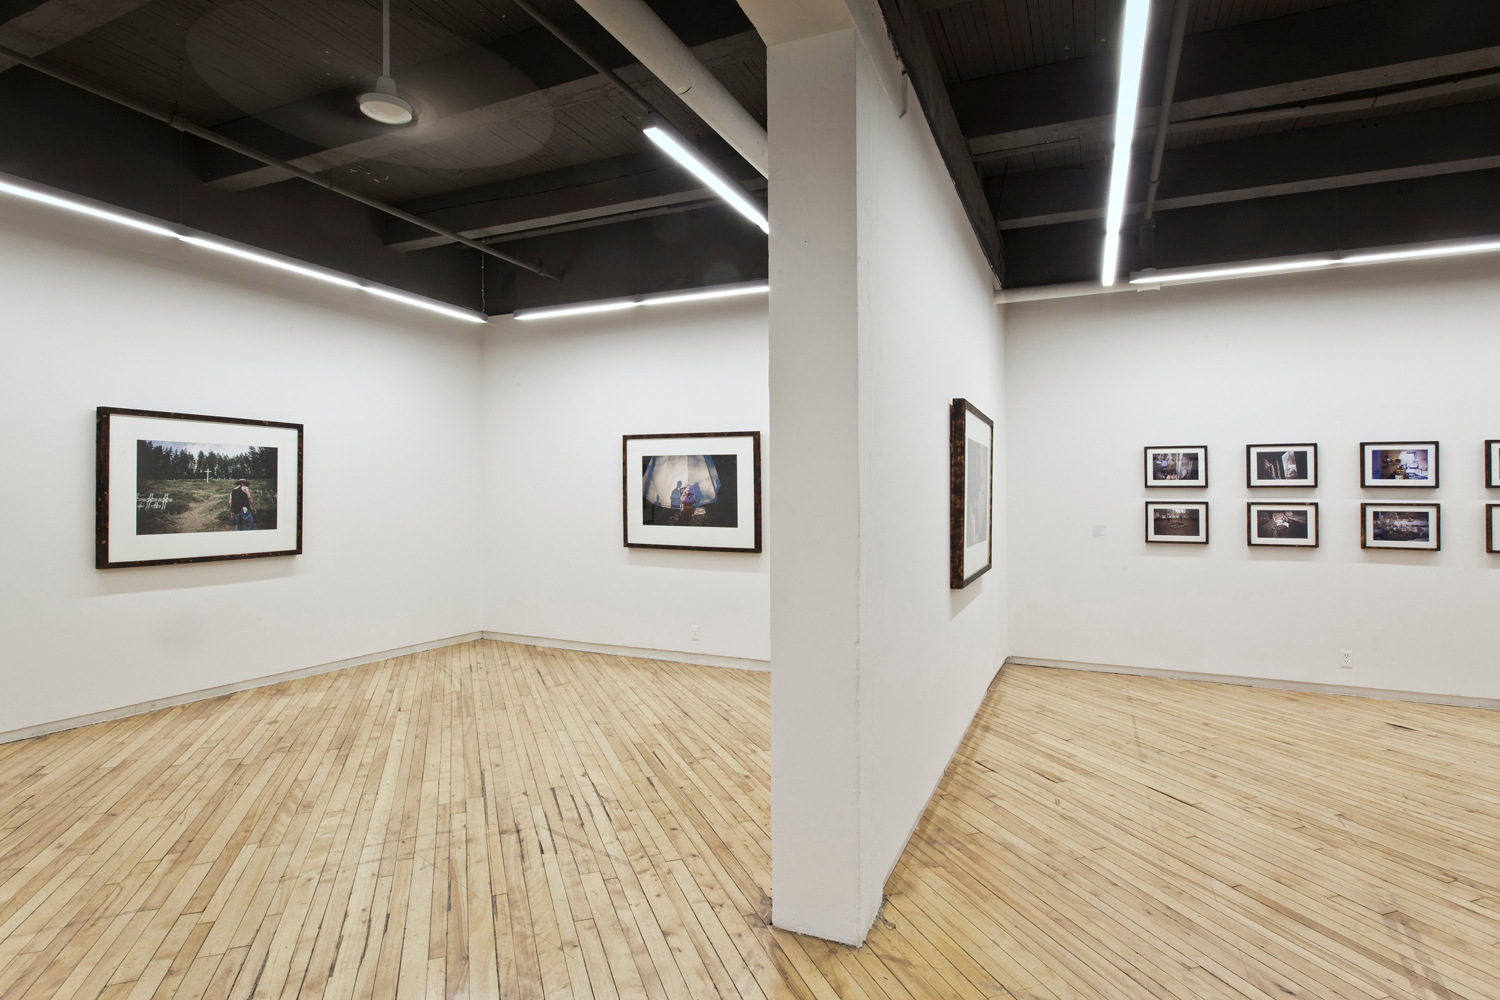     Installation view of Jonathan Taggart, The Friction of Distance: The Lillooet River Valley, 2012.

